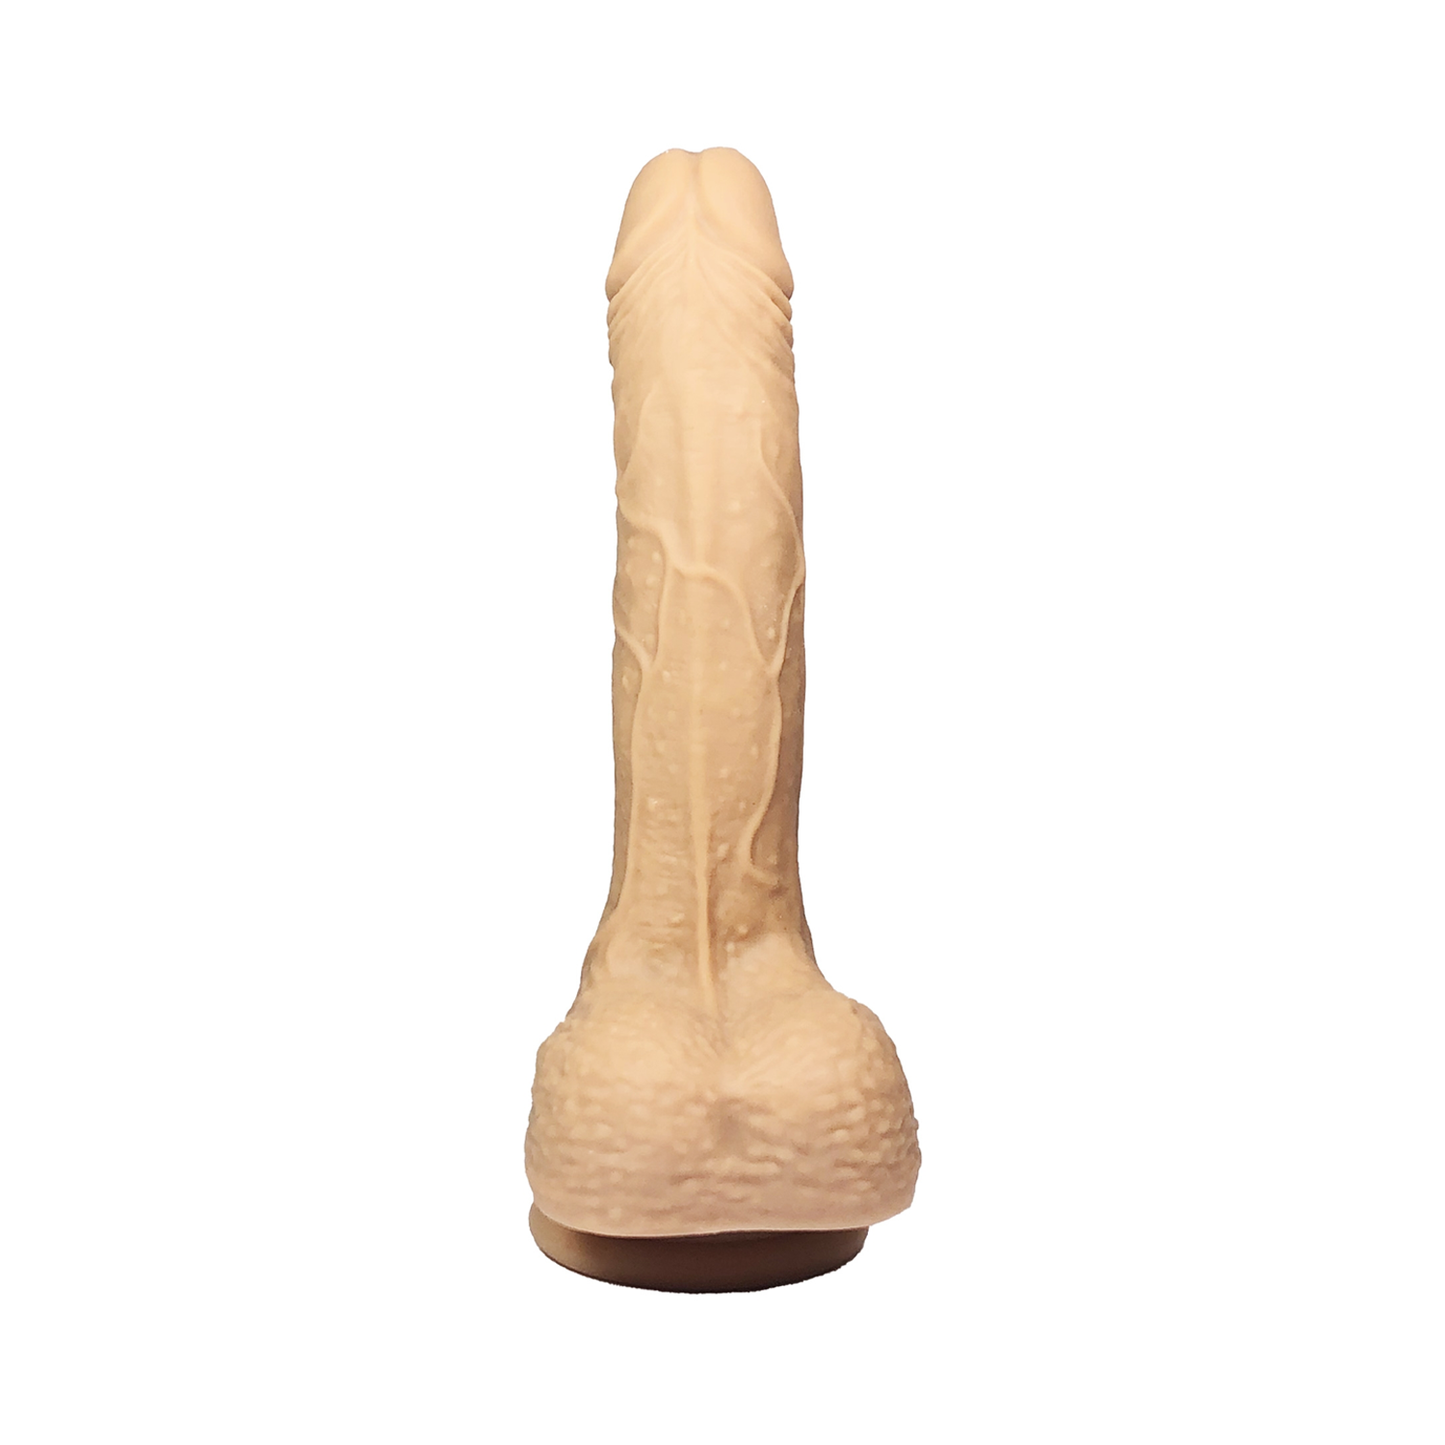 The Horny Company - Brad Damn Realistic Rechargeable Thrusting Dildo 7" with Remote Control